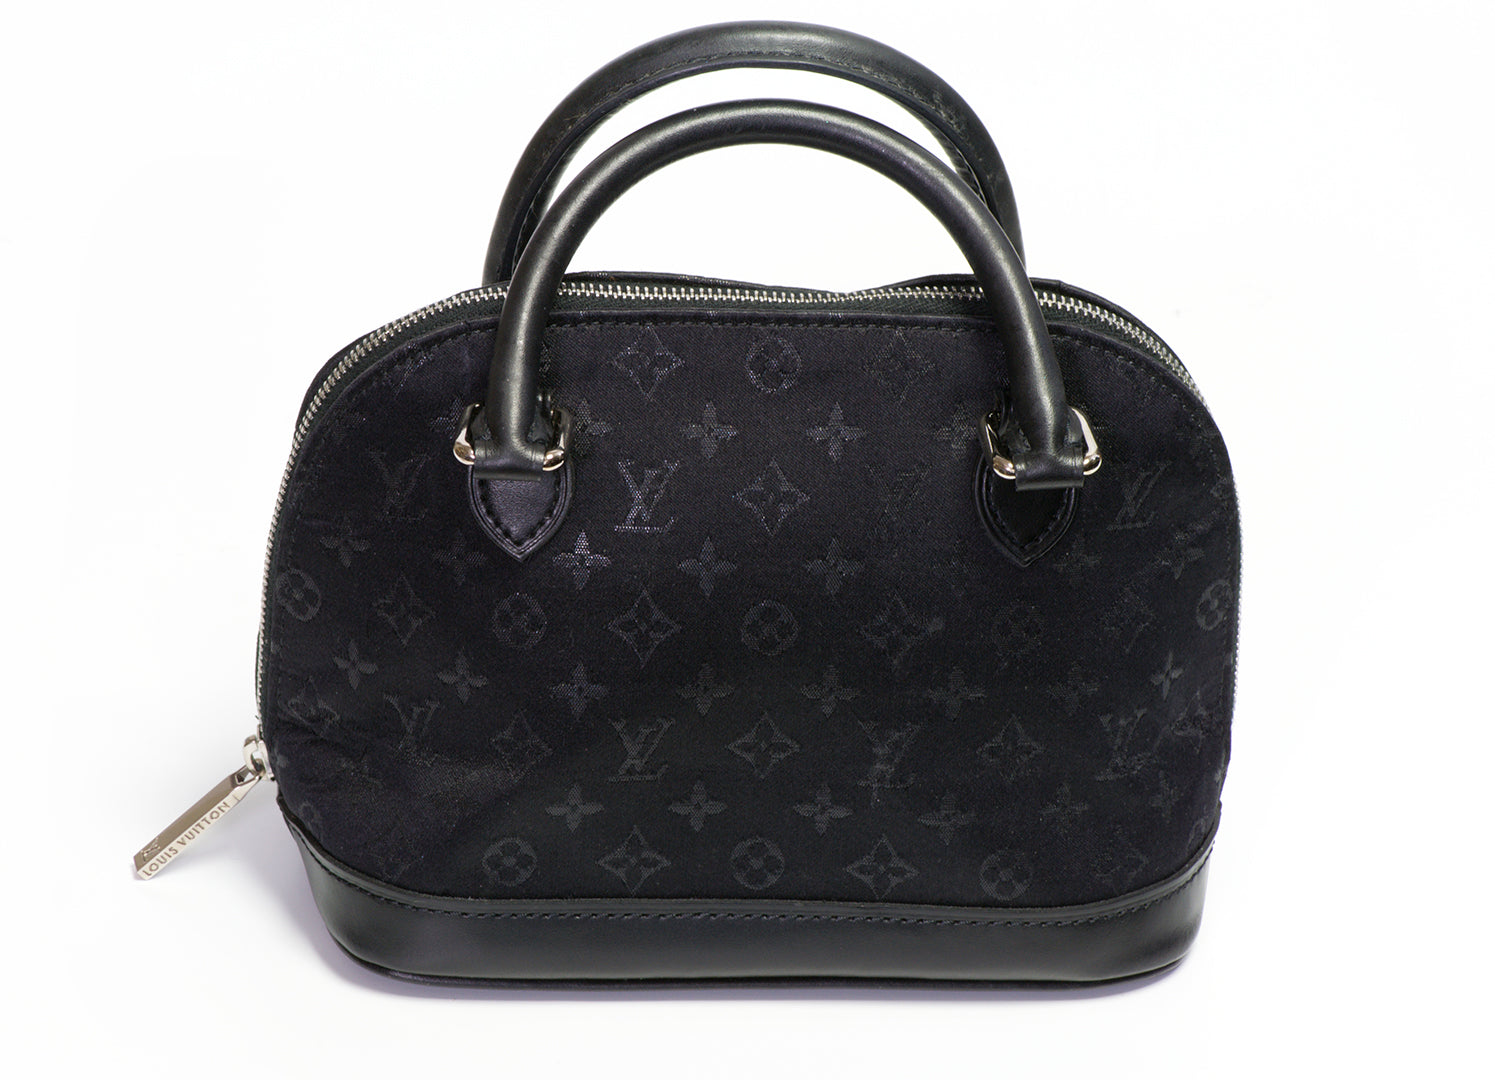 Louis Vuitton - Authenticated Félicie Handbag - Leather Black for Women, Never Worn, with Tag